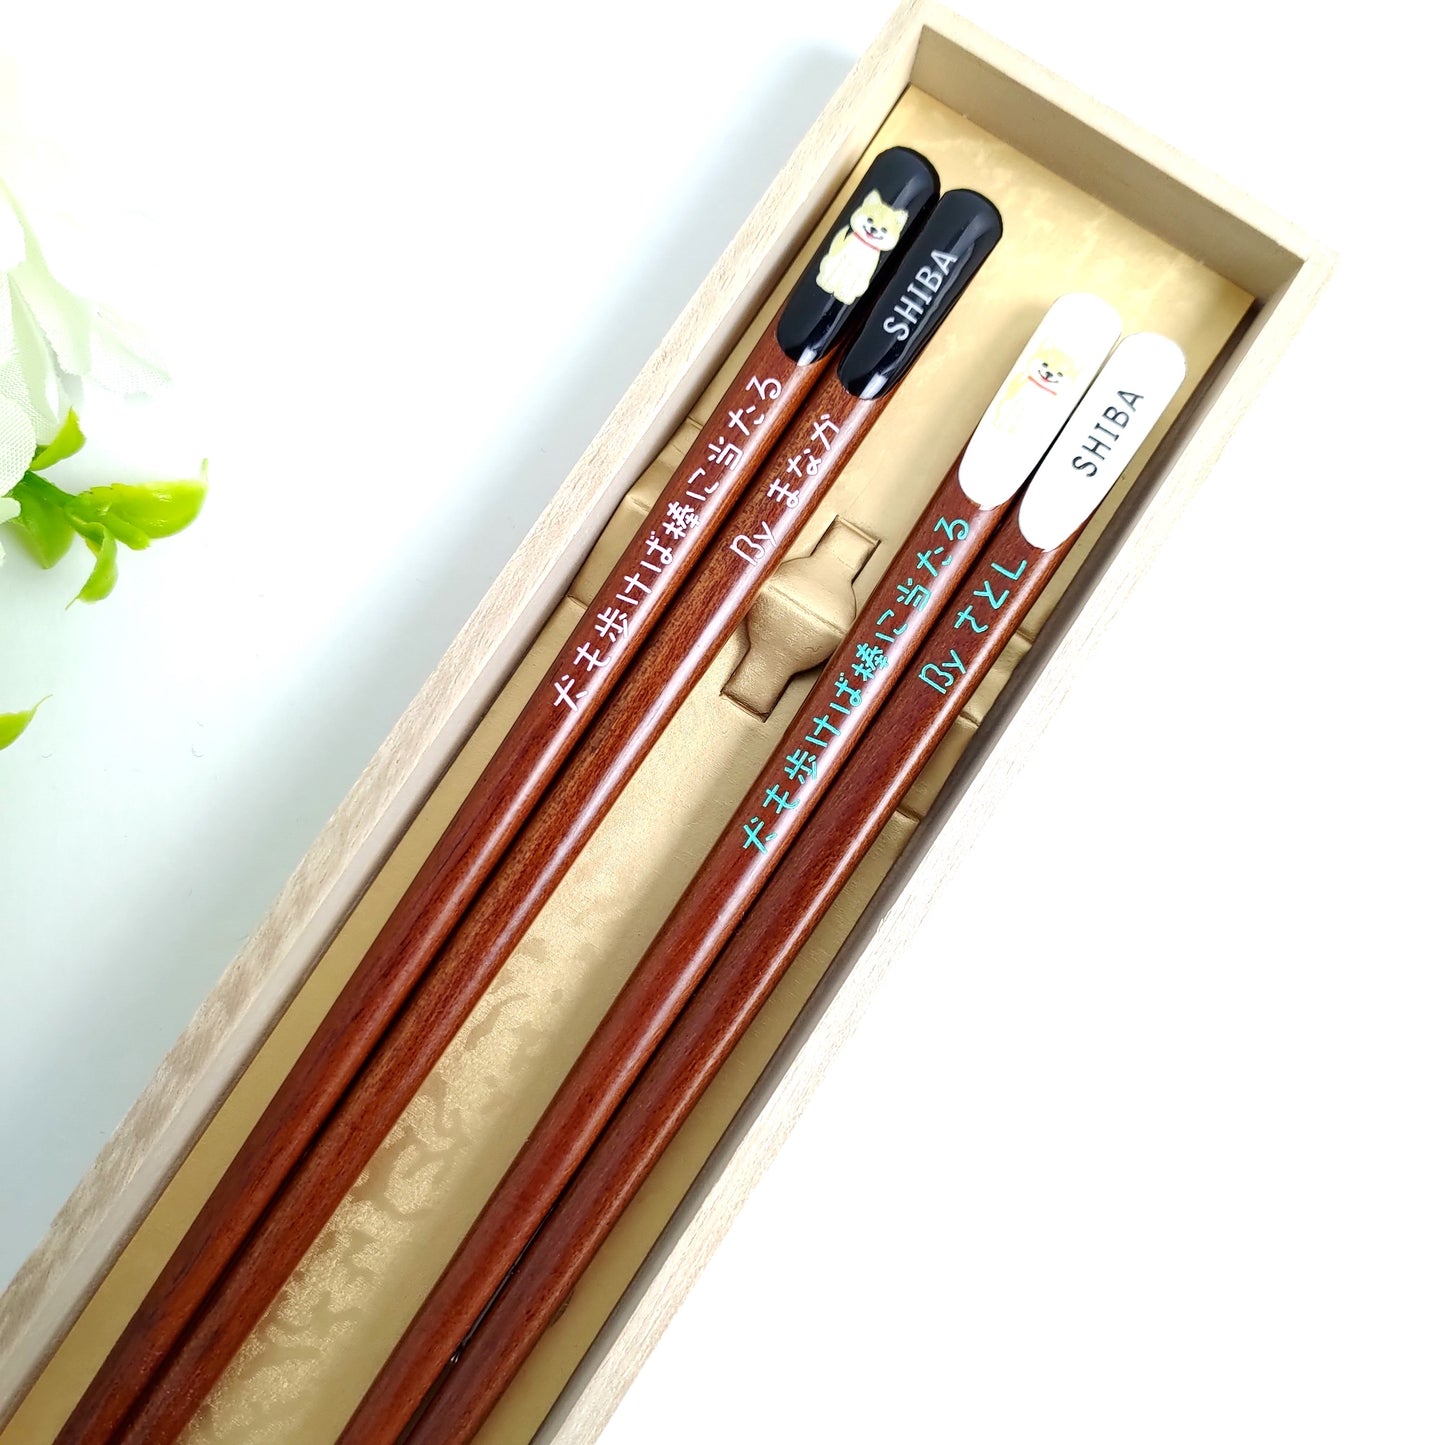 Cute Japanese chopsticks with adorable shiba dog design black white - DOUBLE PAIR WITH ENGRAVED WOODEN BOX SET